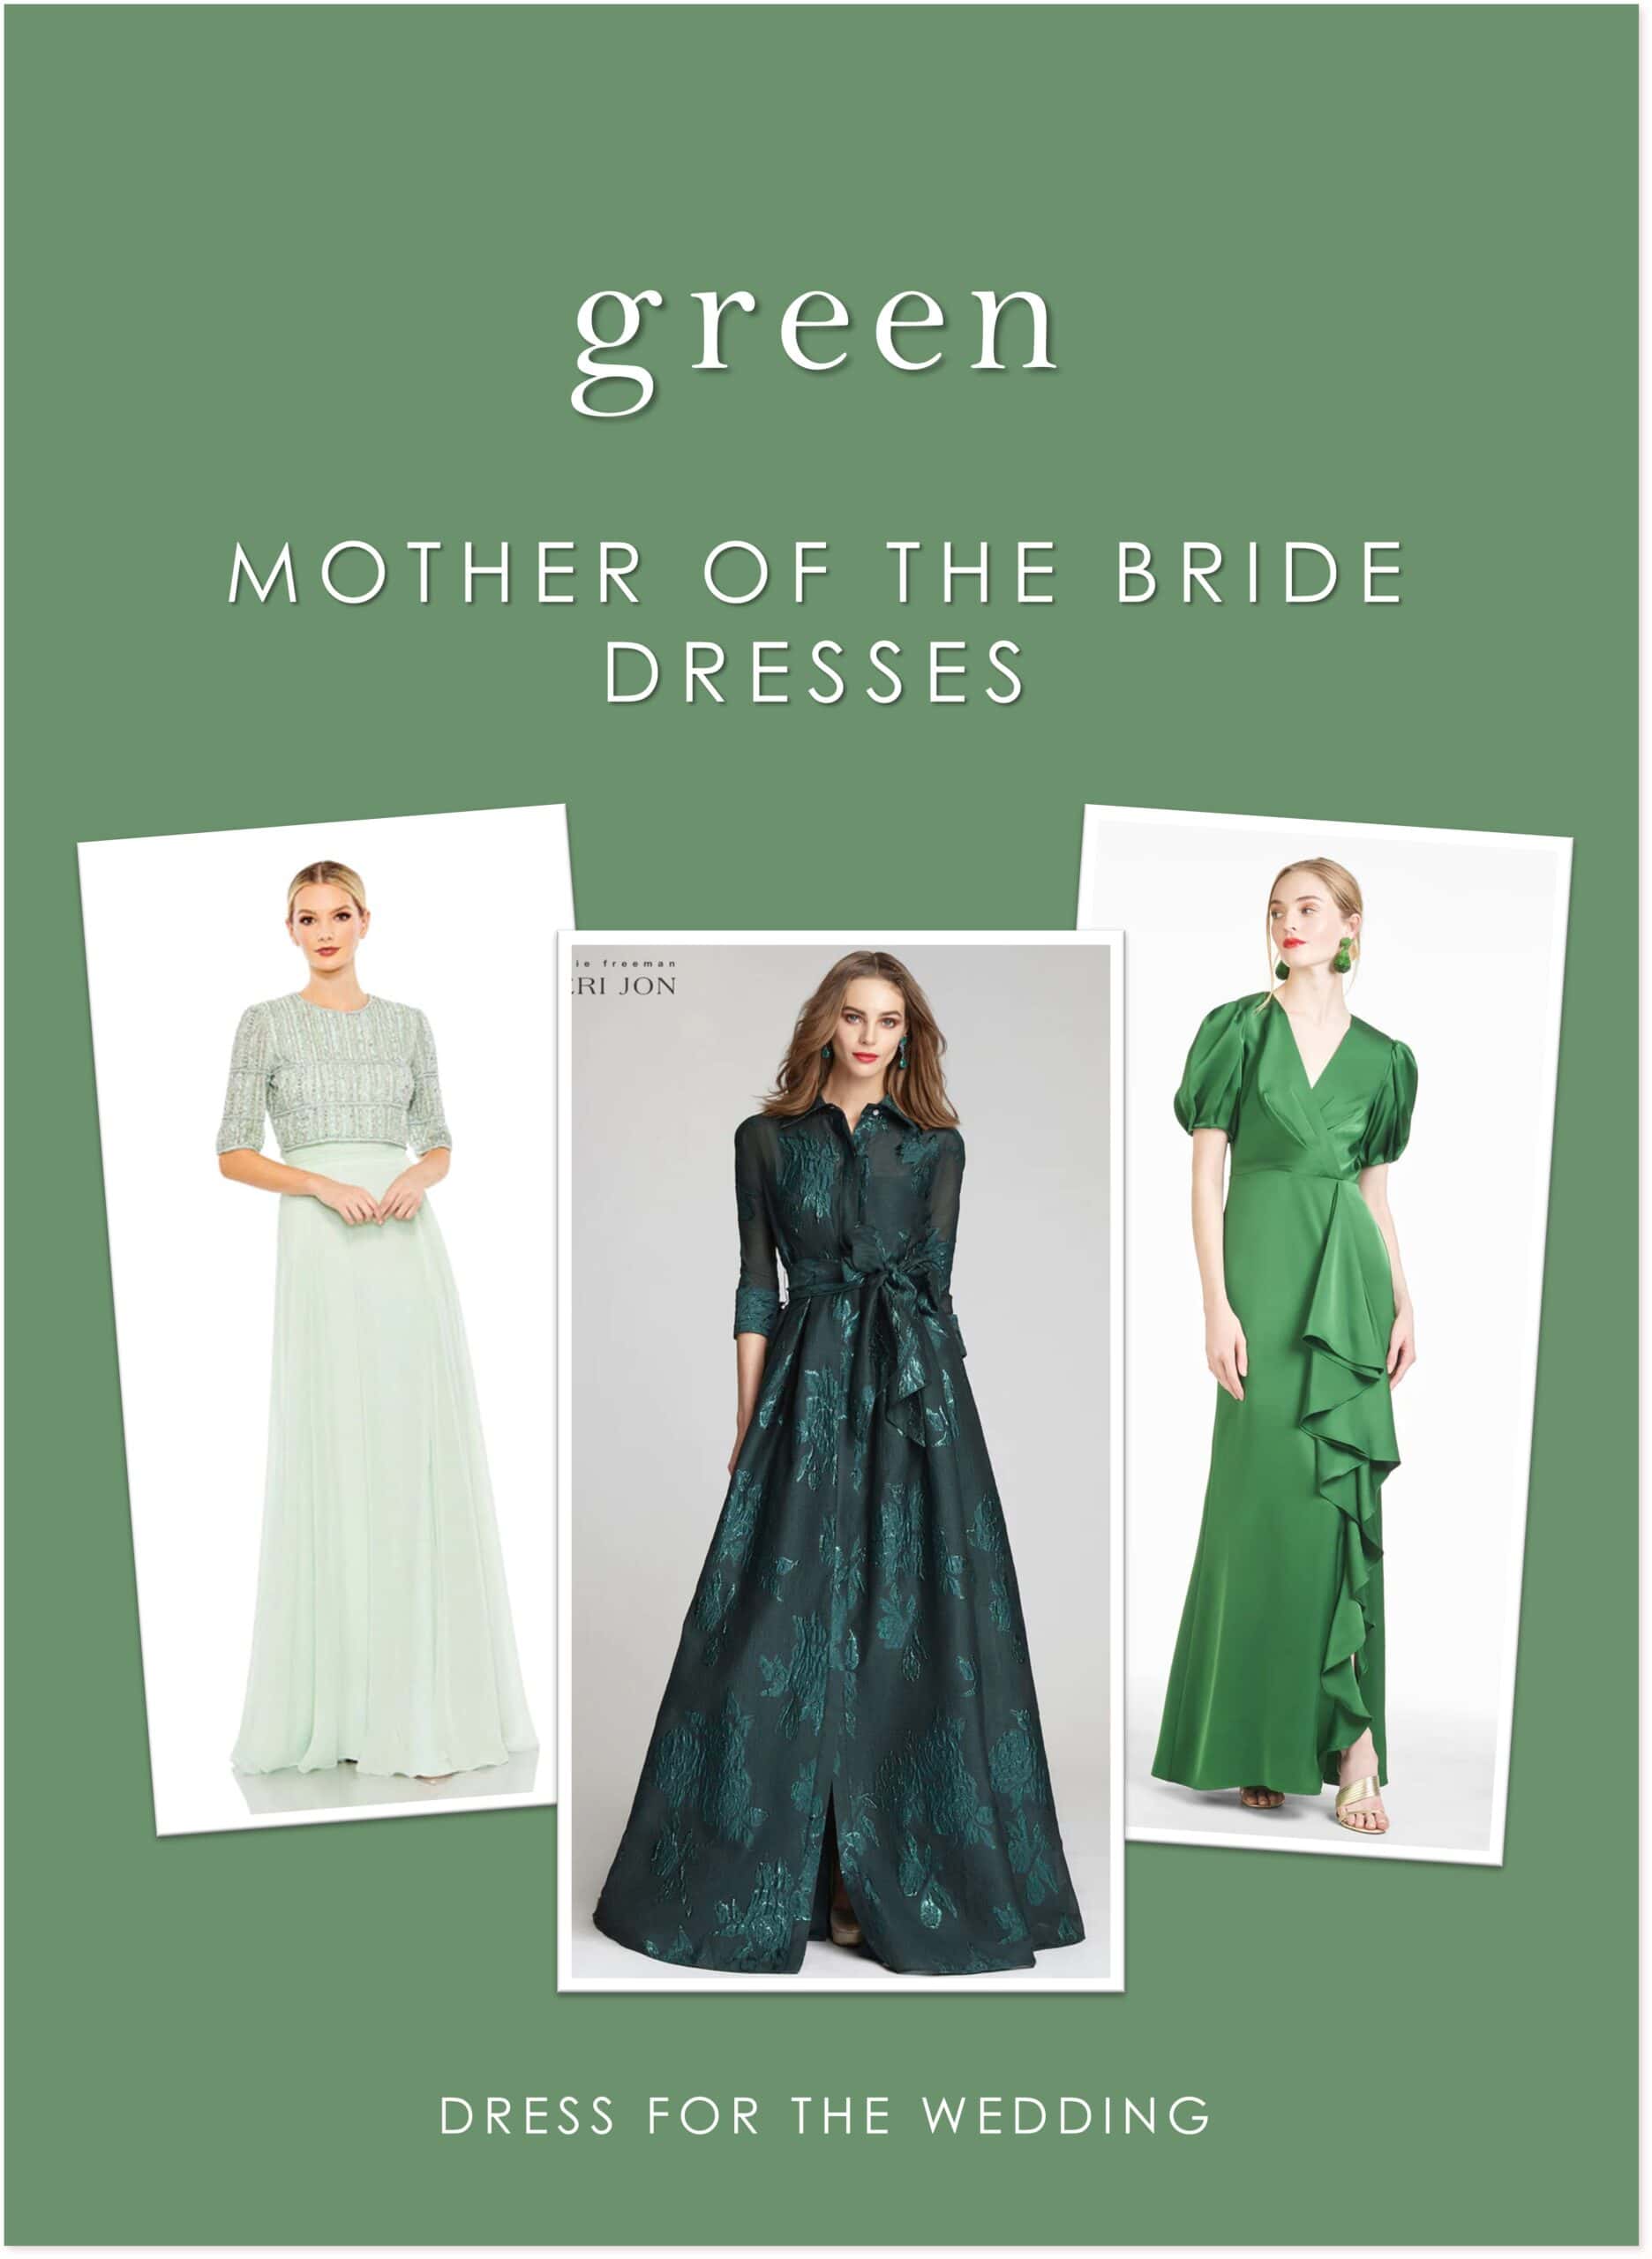 Green Mother of the Bride Dresses - Dress for the Wedding